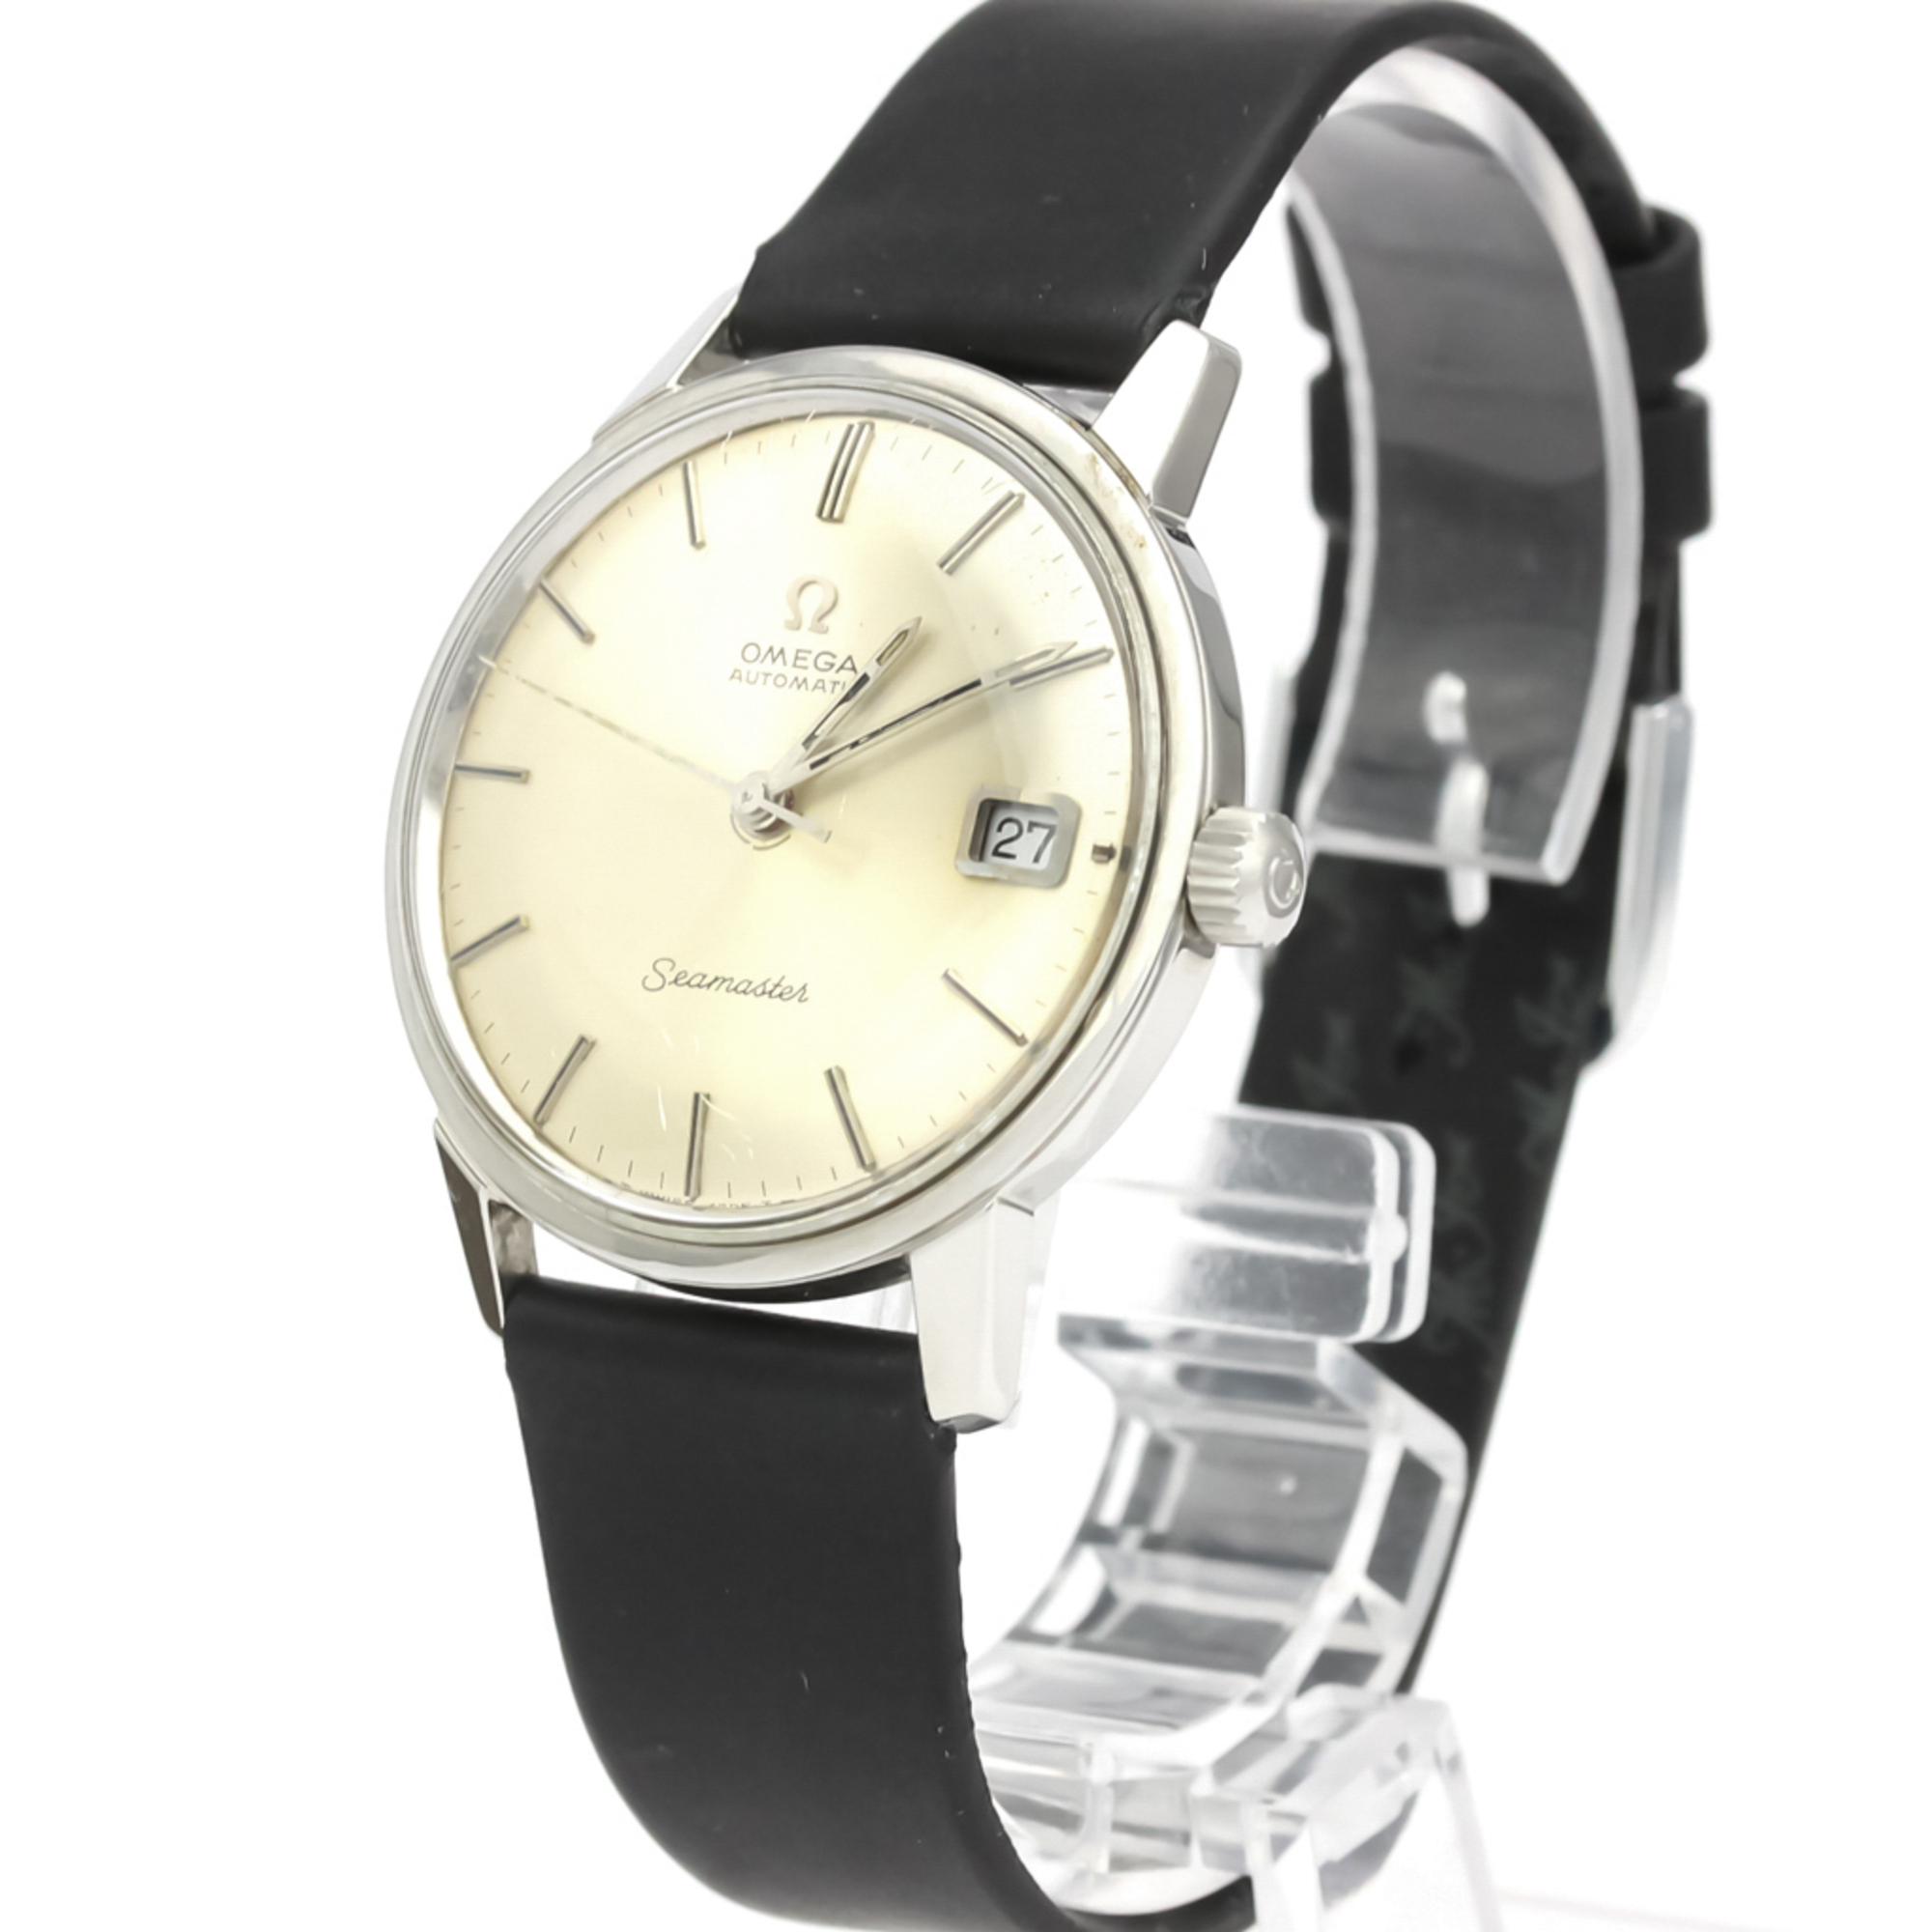 OMEGA Seamaster Date Steel Automatic Men's Watch 166.037